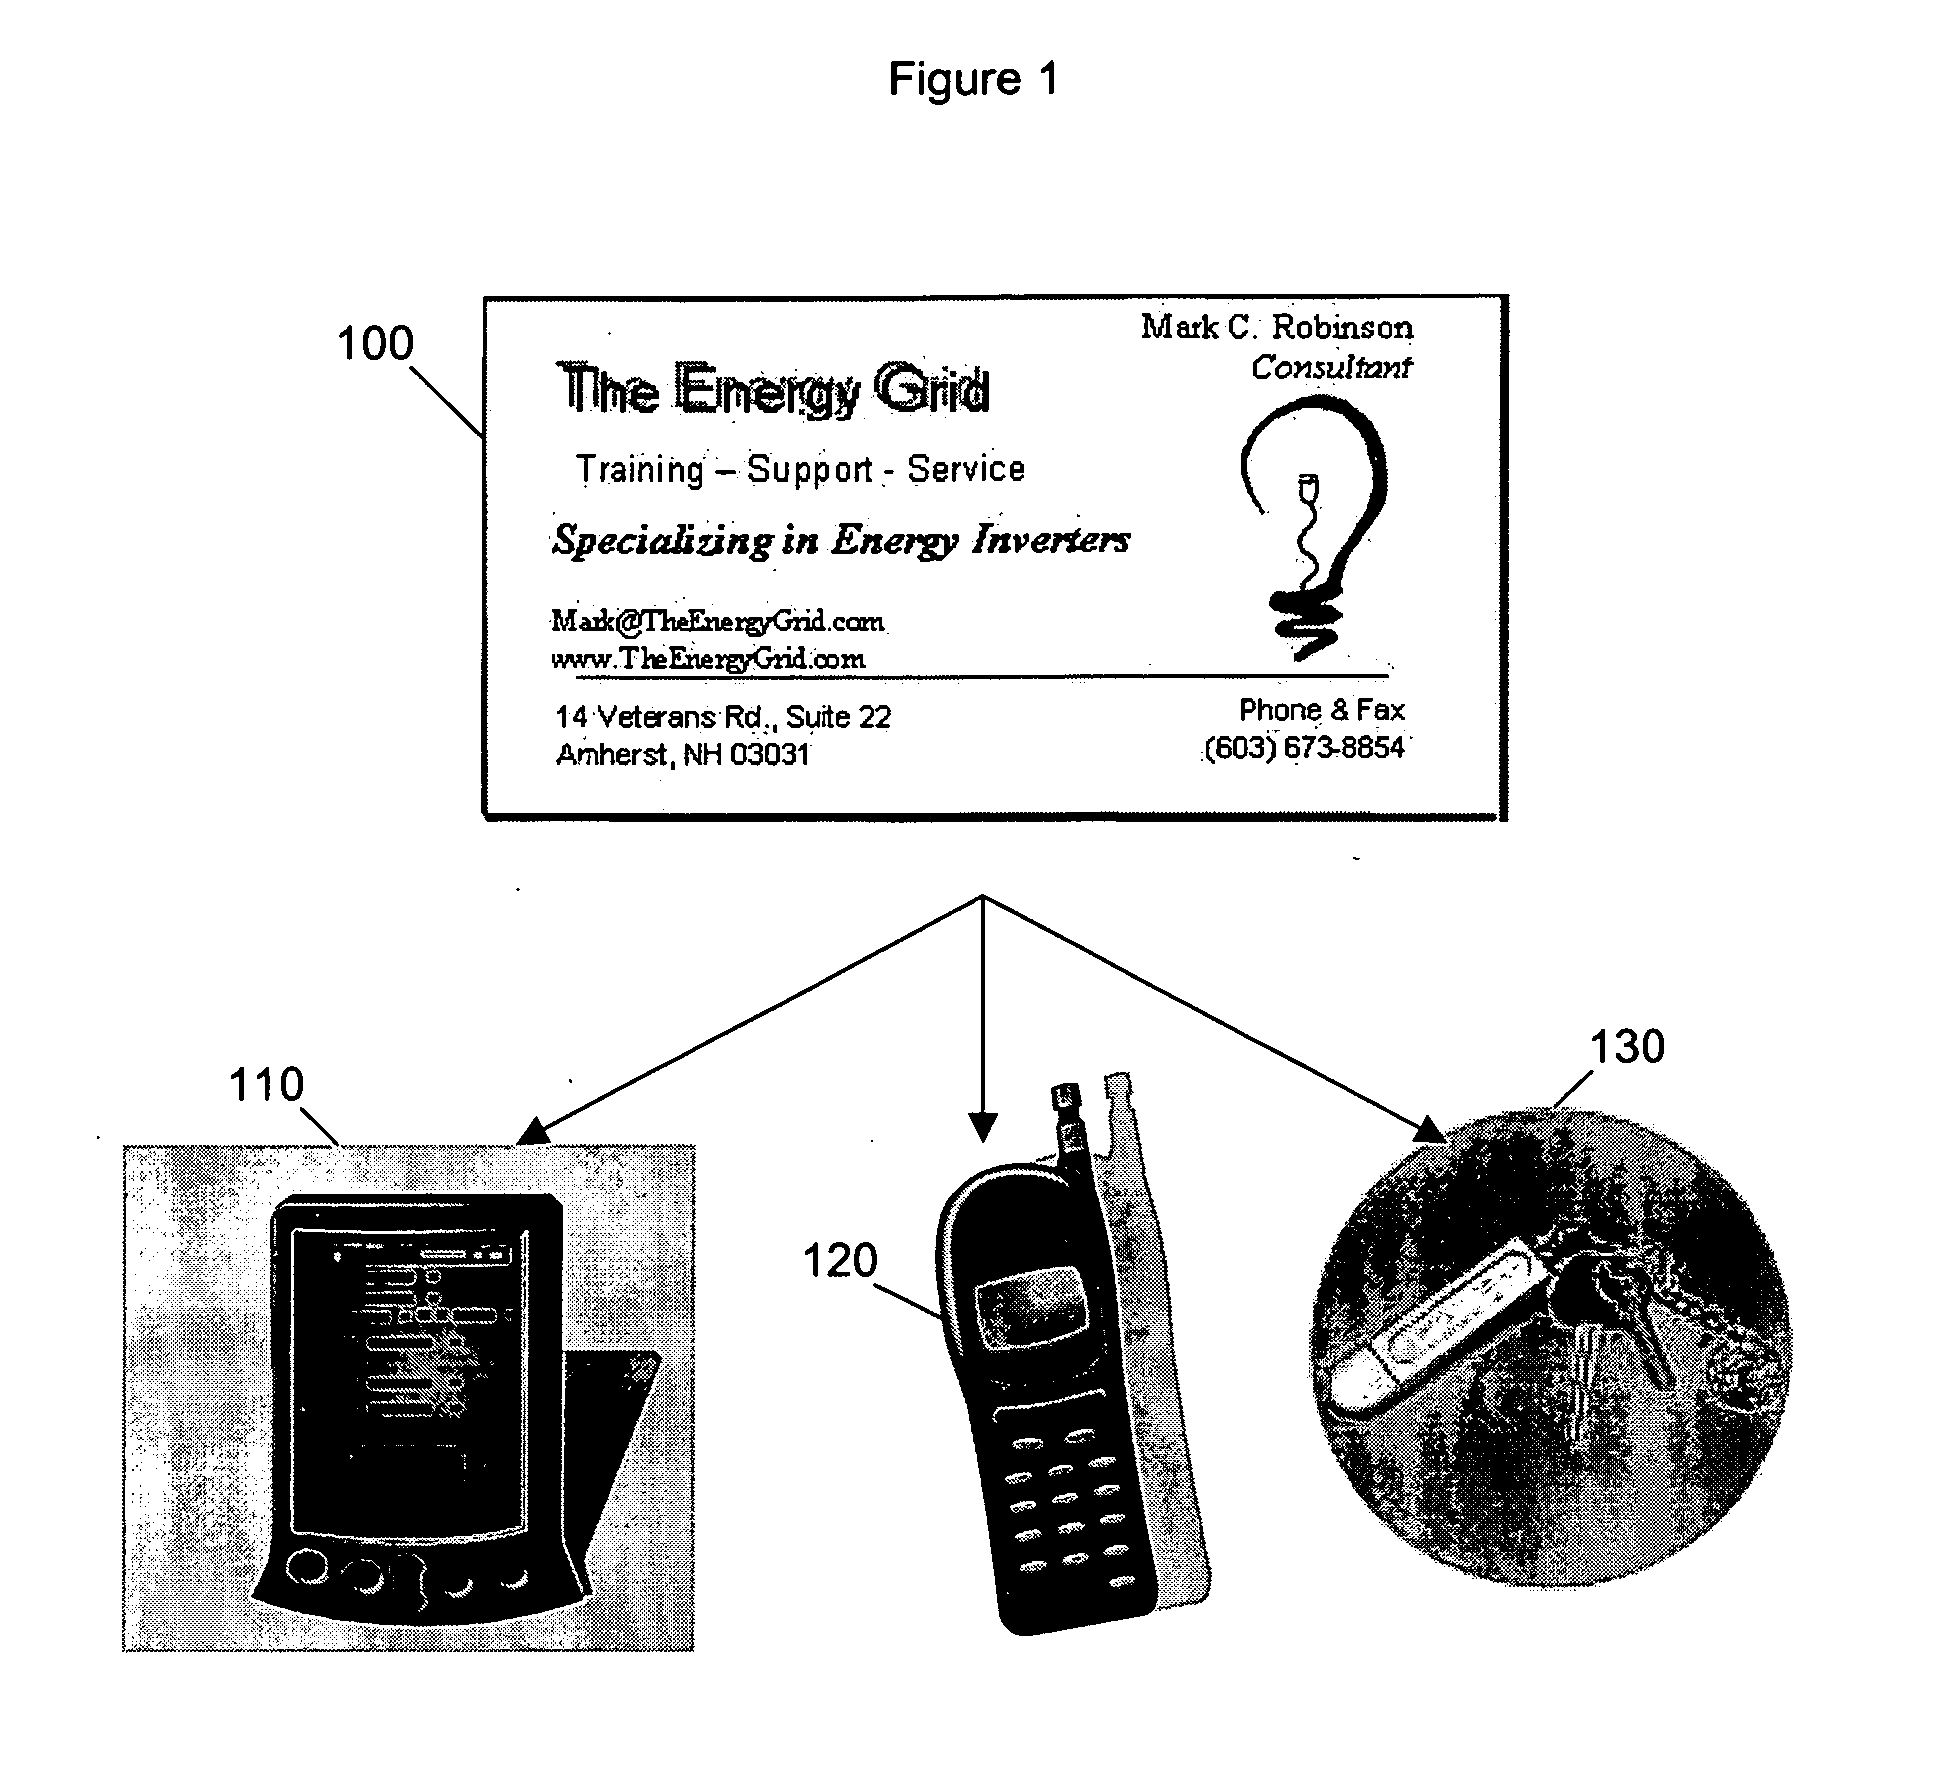 Method and apparatus for electronically exchanging and storing an image of a business card along with associated card information